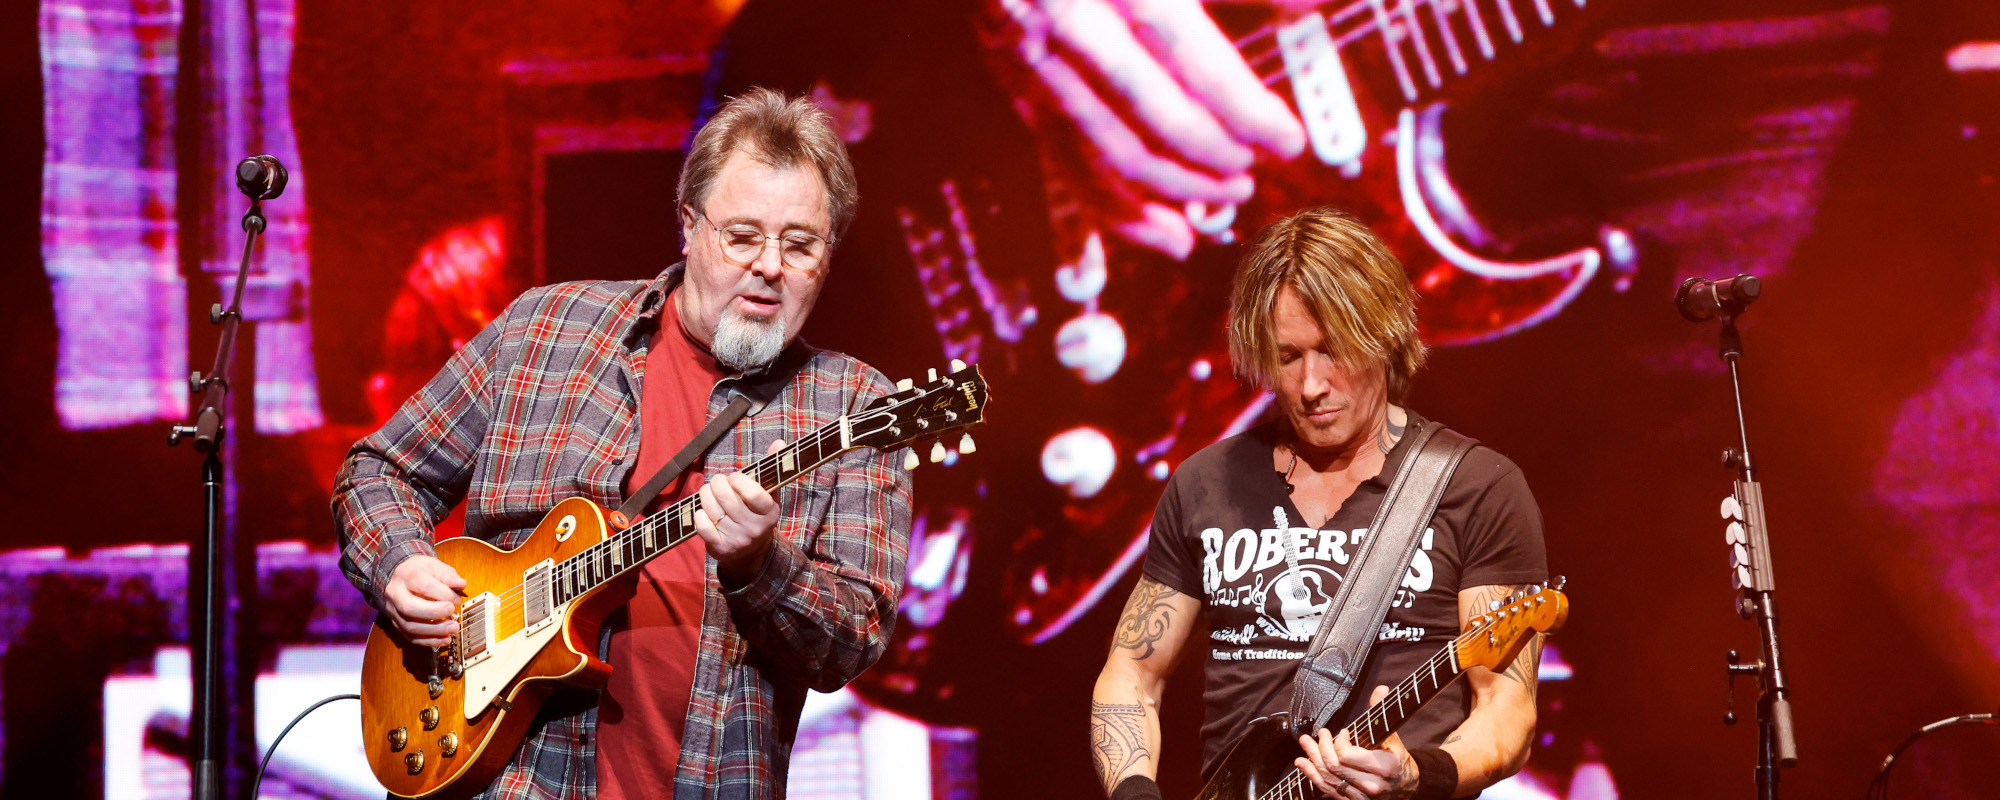 All for the Hall: See Photos from Keith Urban and Vince Gill’s Nashville Show That Raised Close to $1 Million